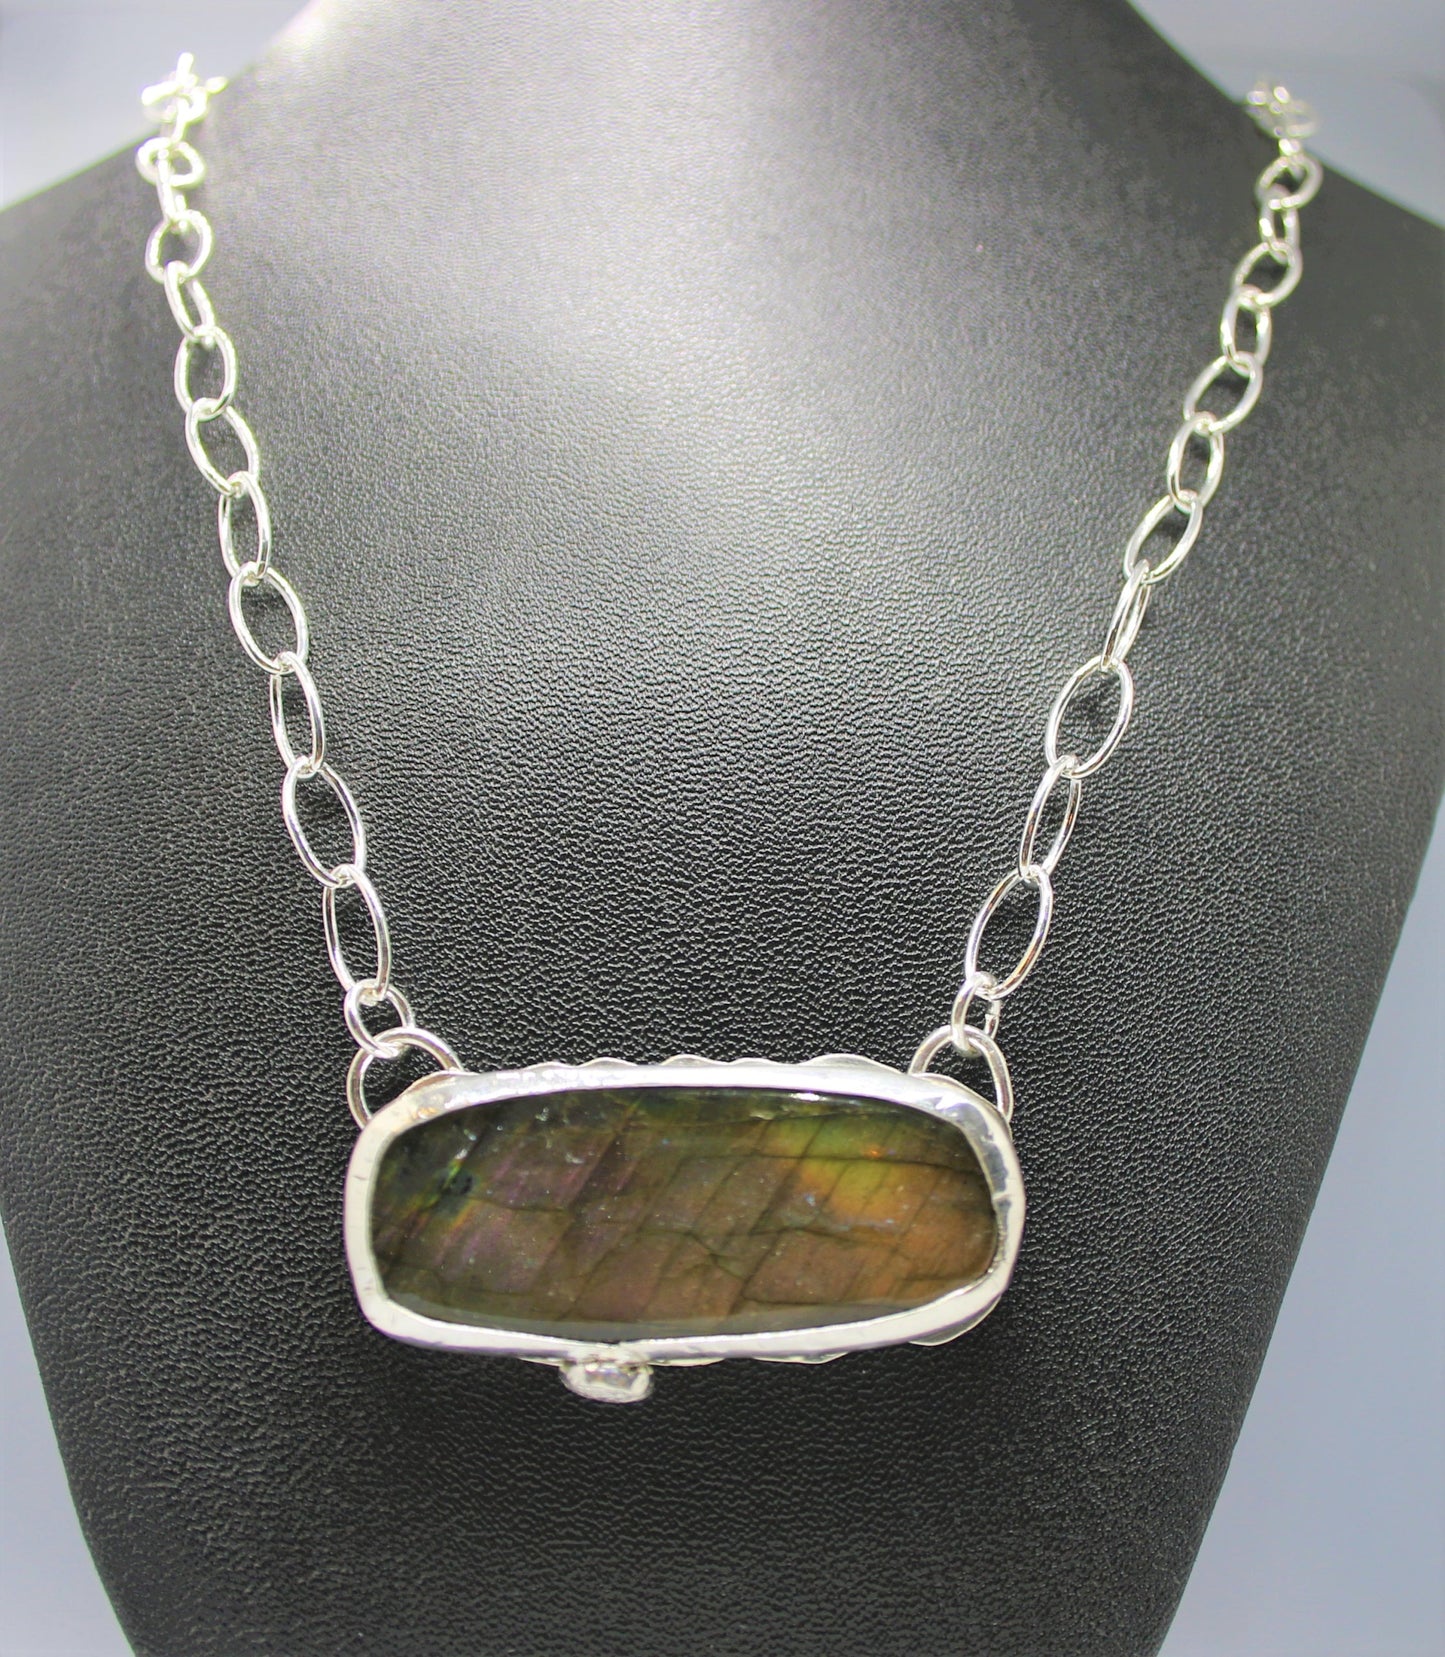 "Magical Rainbow" Sterling Silver Labradorite Necklace